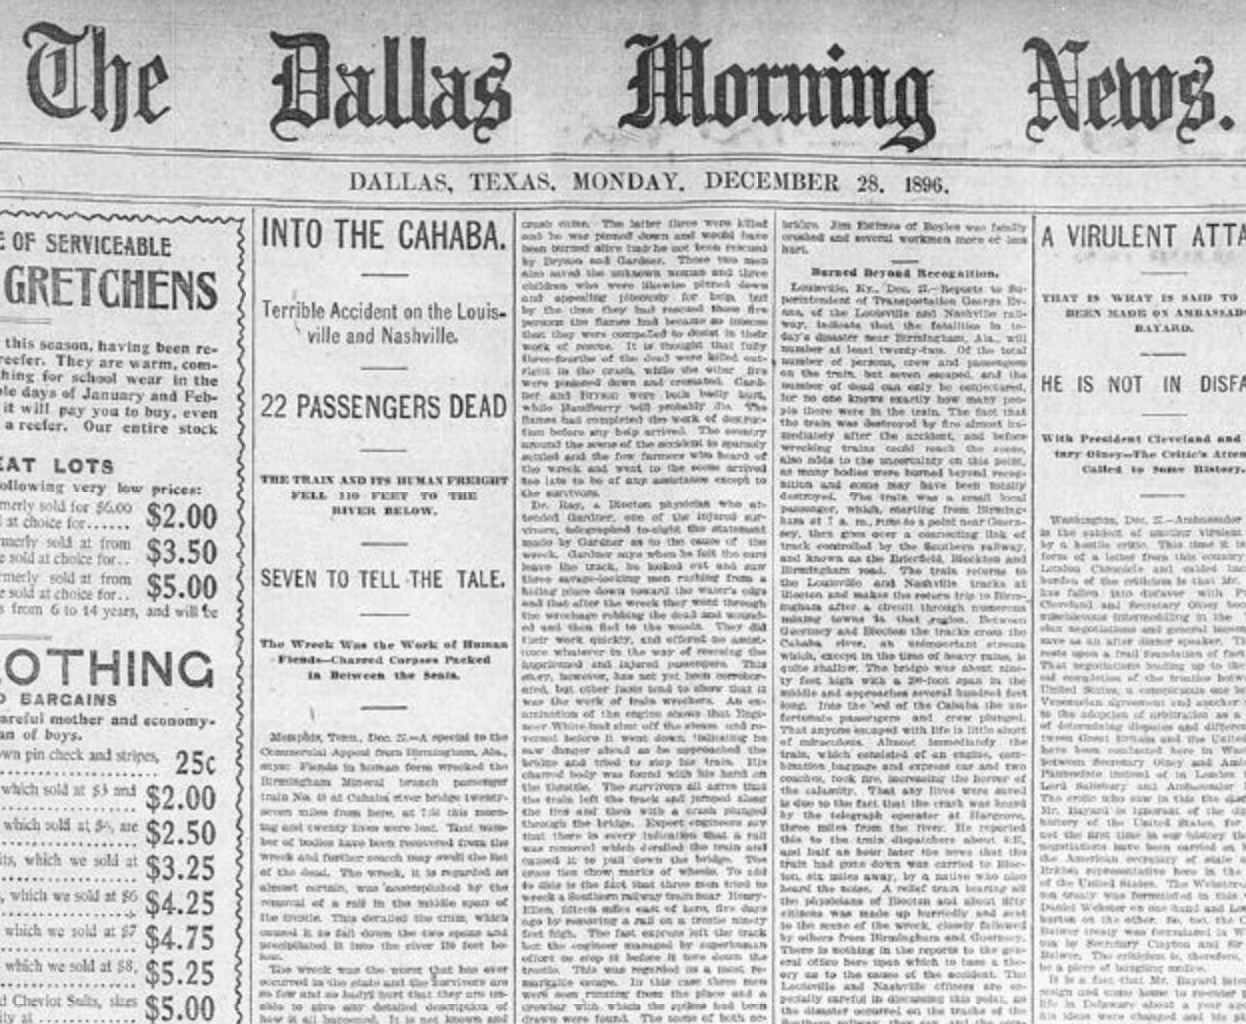 Dec 28, 1896 Dallas Morning News frontpage coverage of the fatal Cahaba train wreck.